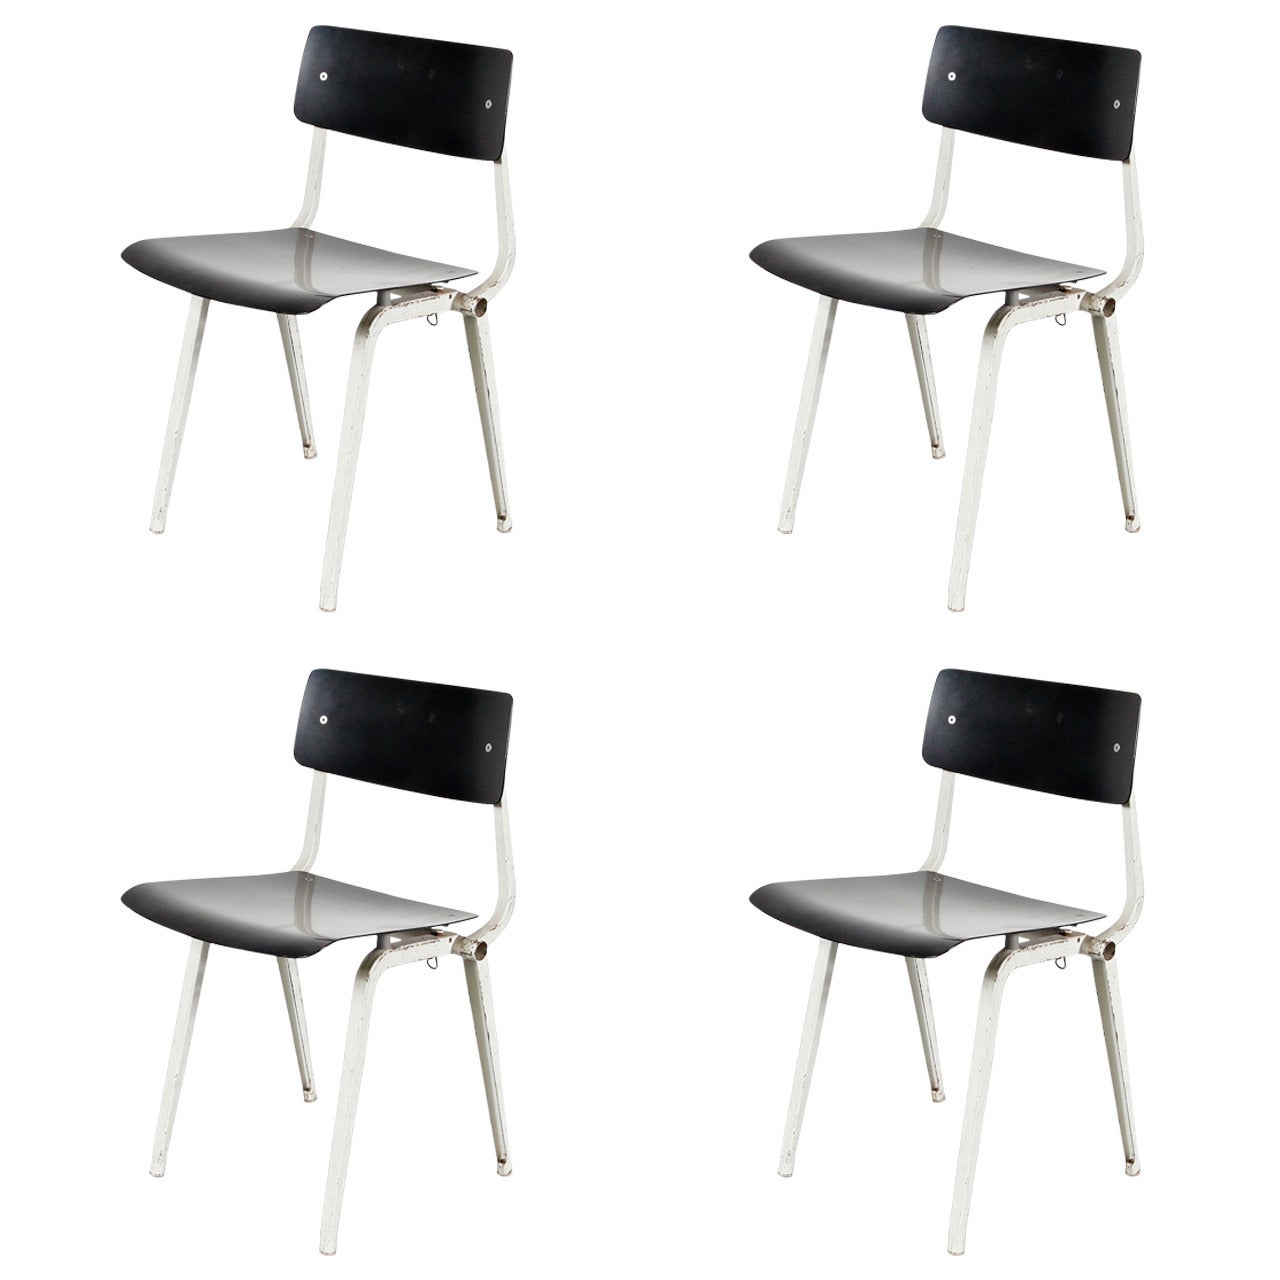 Rare Set of Four Friso Kramer Theater Chairs, 1959